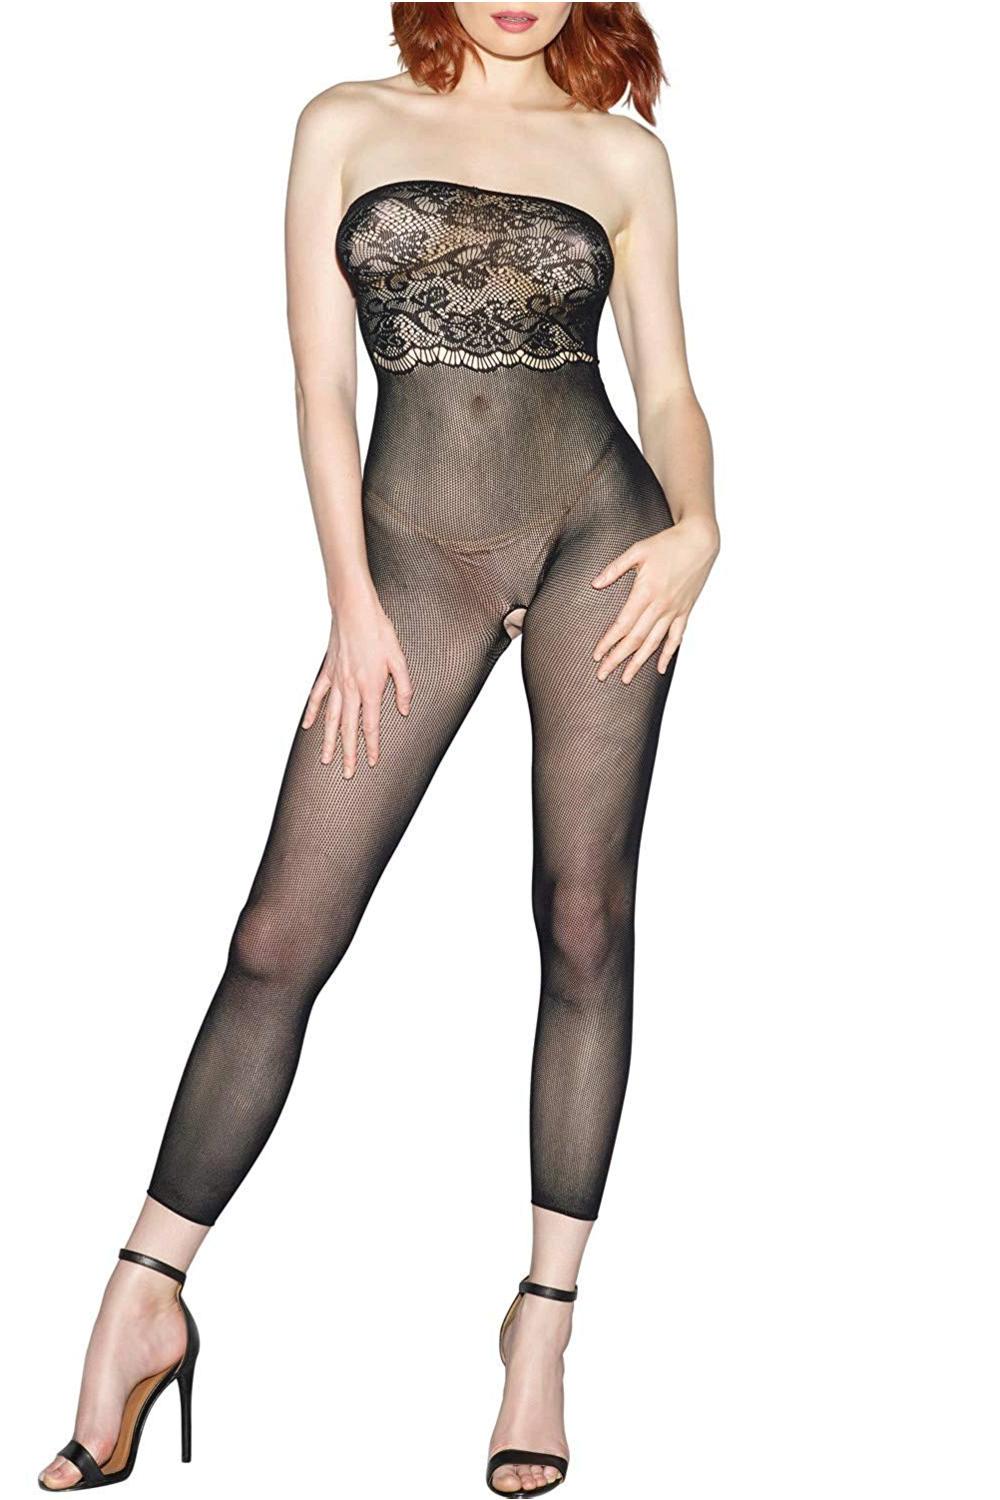 Dreamgirl Women S Multi Way 2 In1 Sheer Body Stocking With